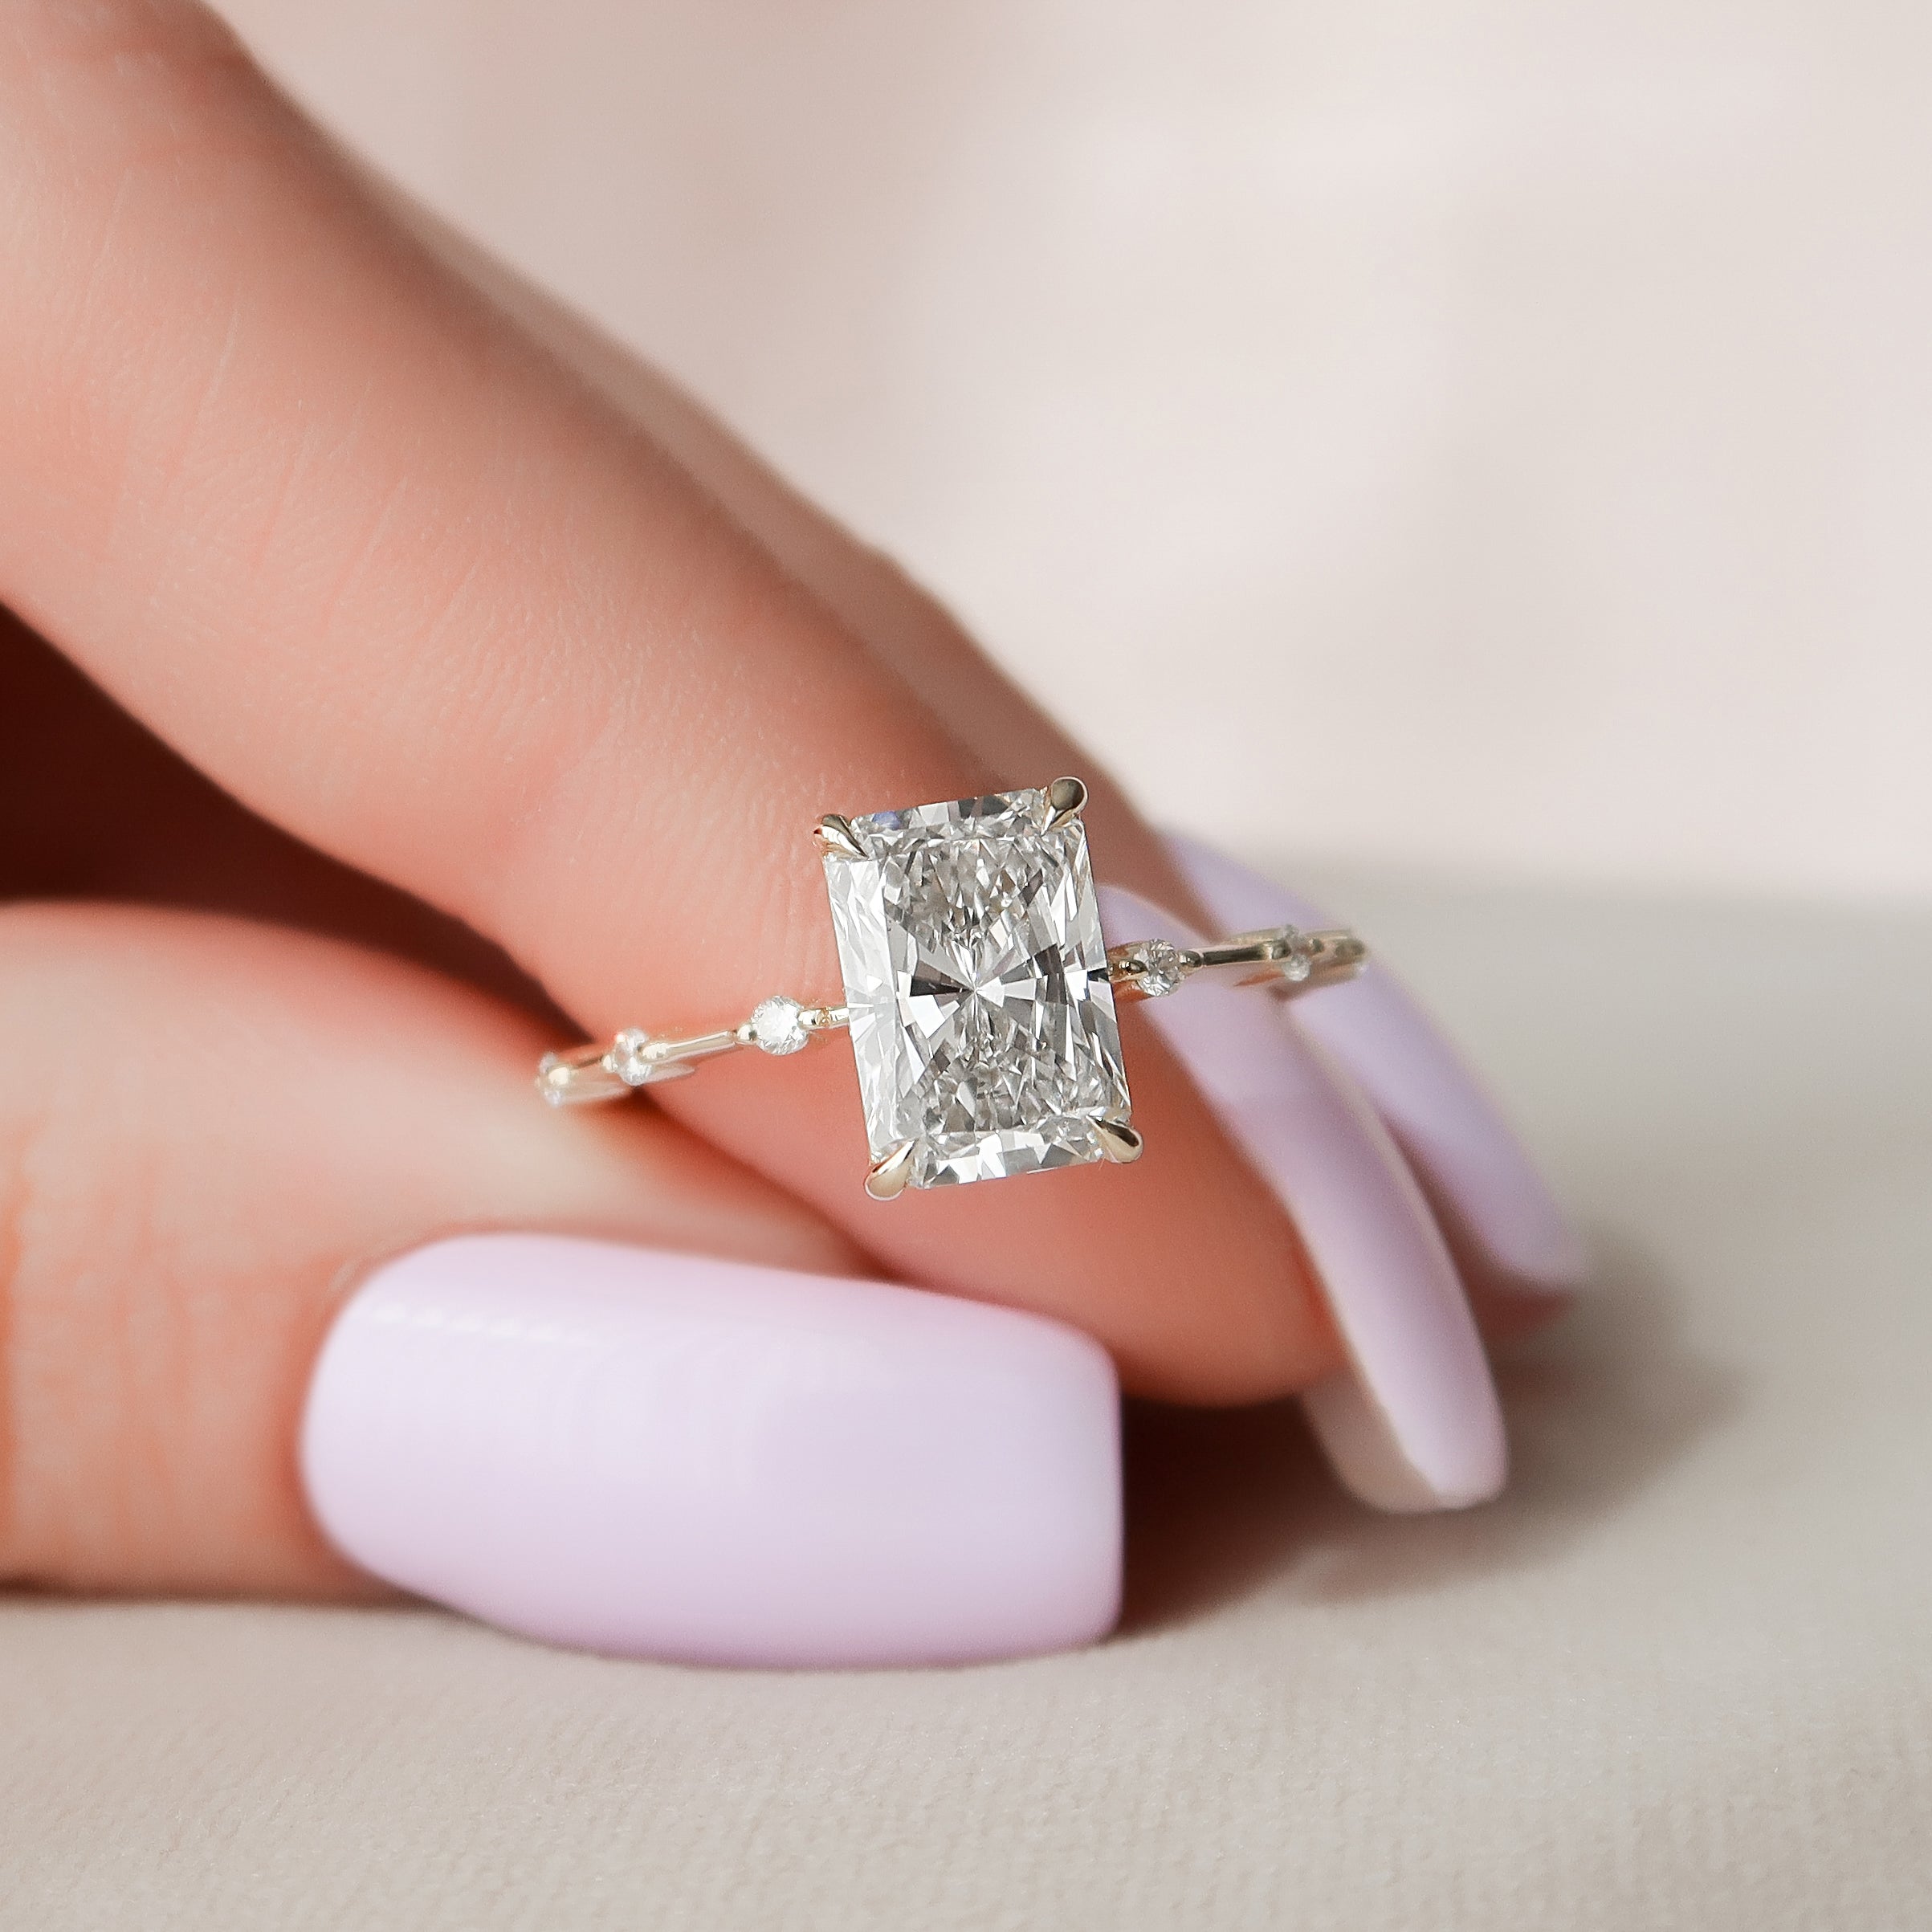 Engagement ring trends for 2020 - Augusta Free Press